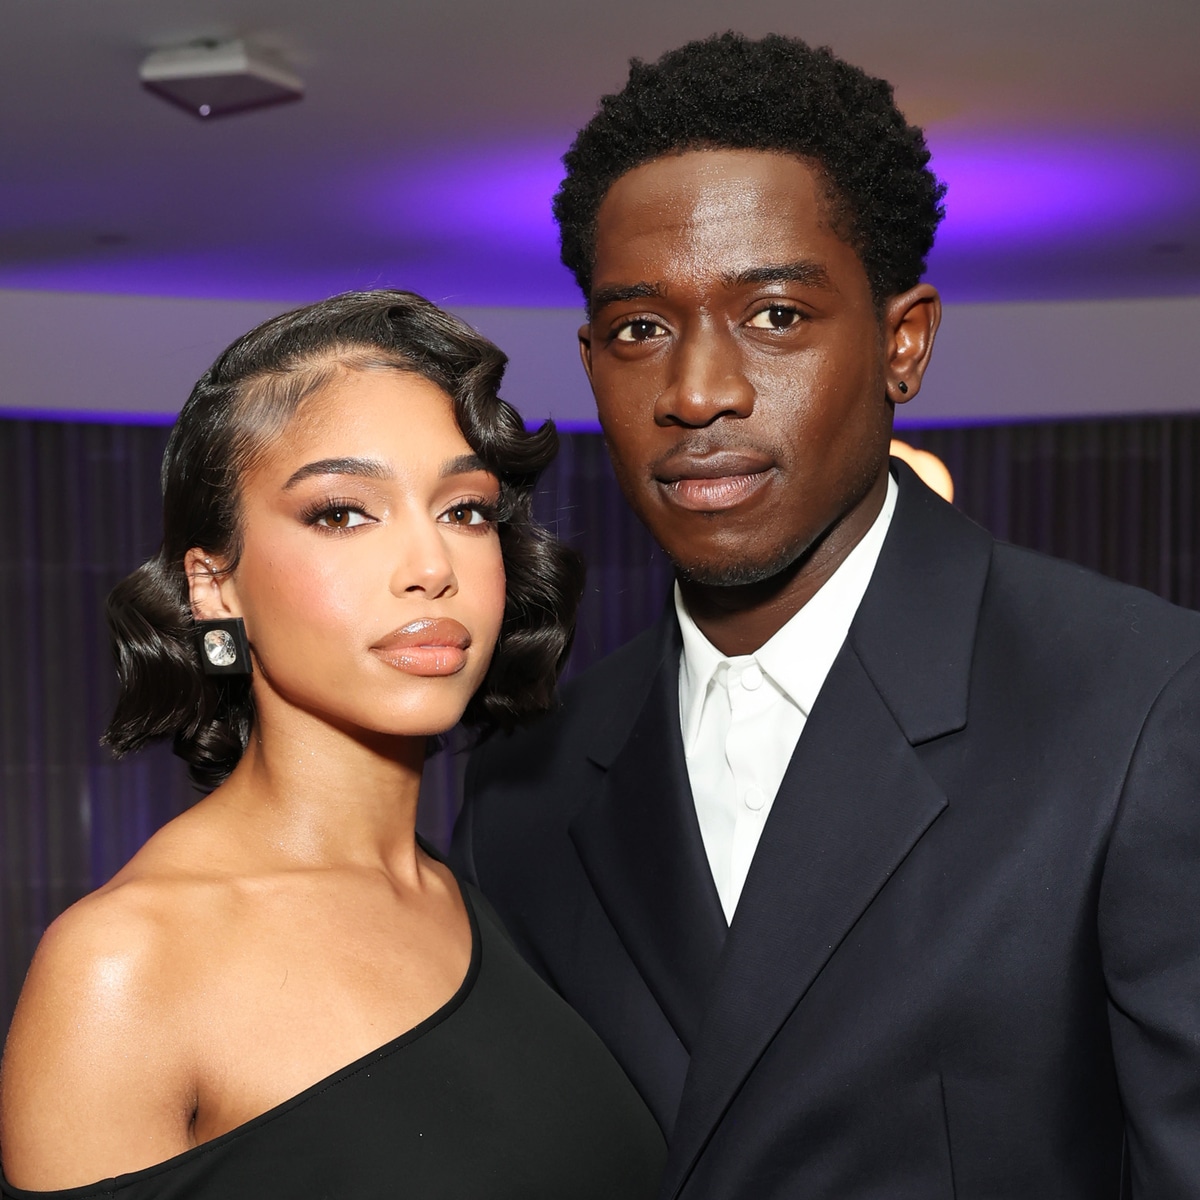 Lori Harvey and Damson Idris Break Up After One Year of Dating